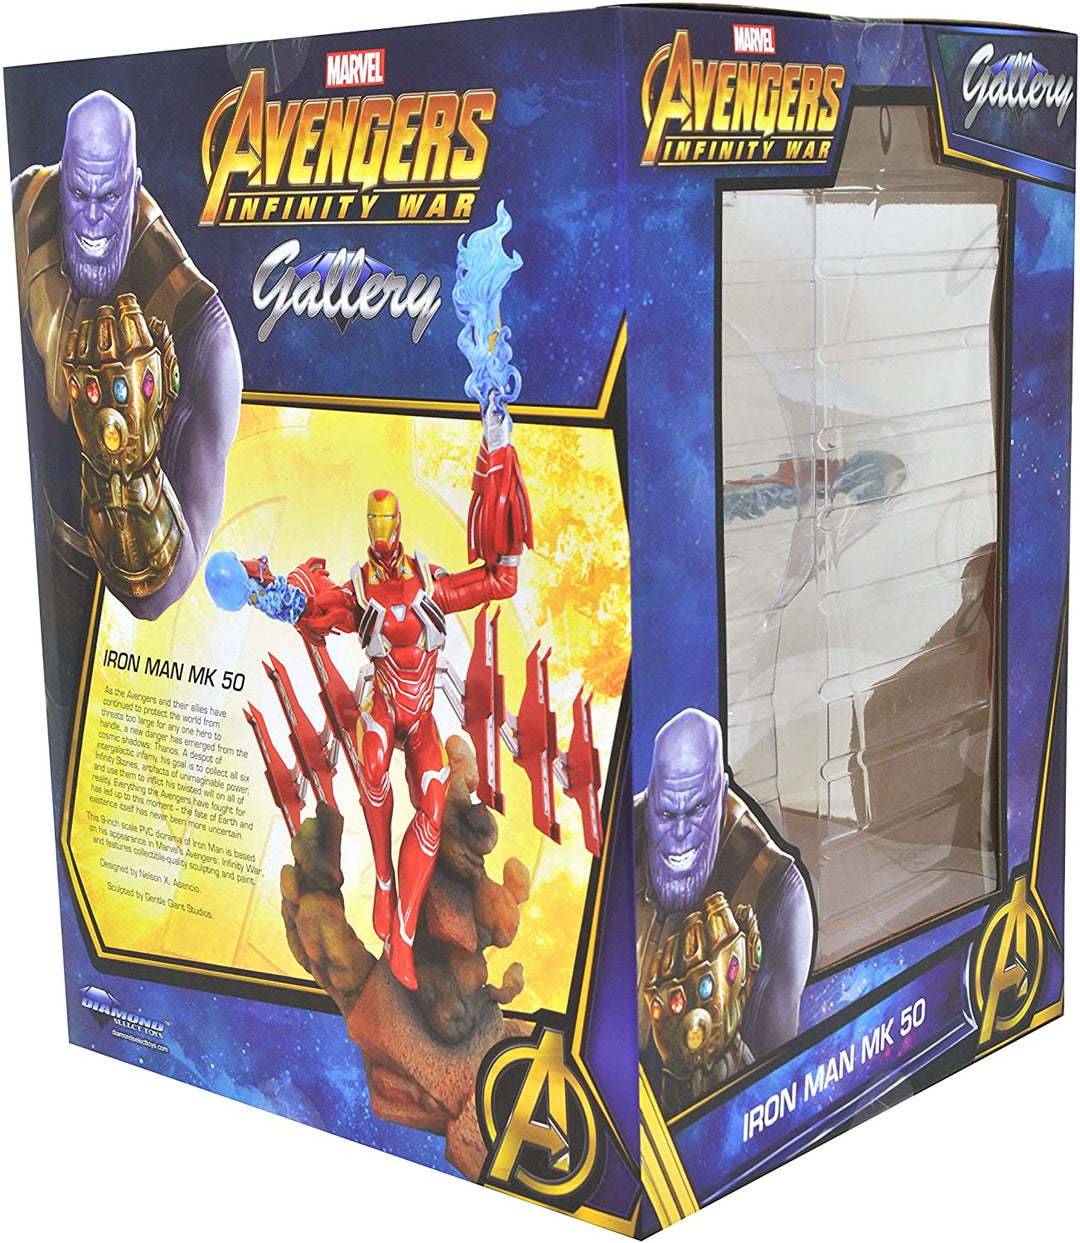 Avengers MAY182307 Statue, Various,One-Size